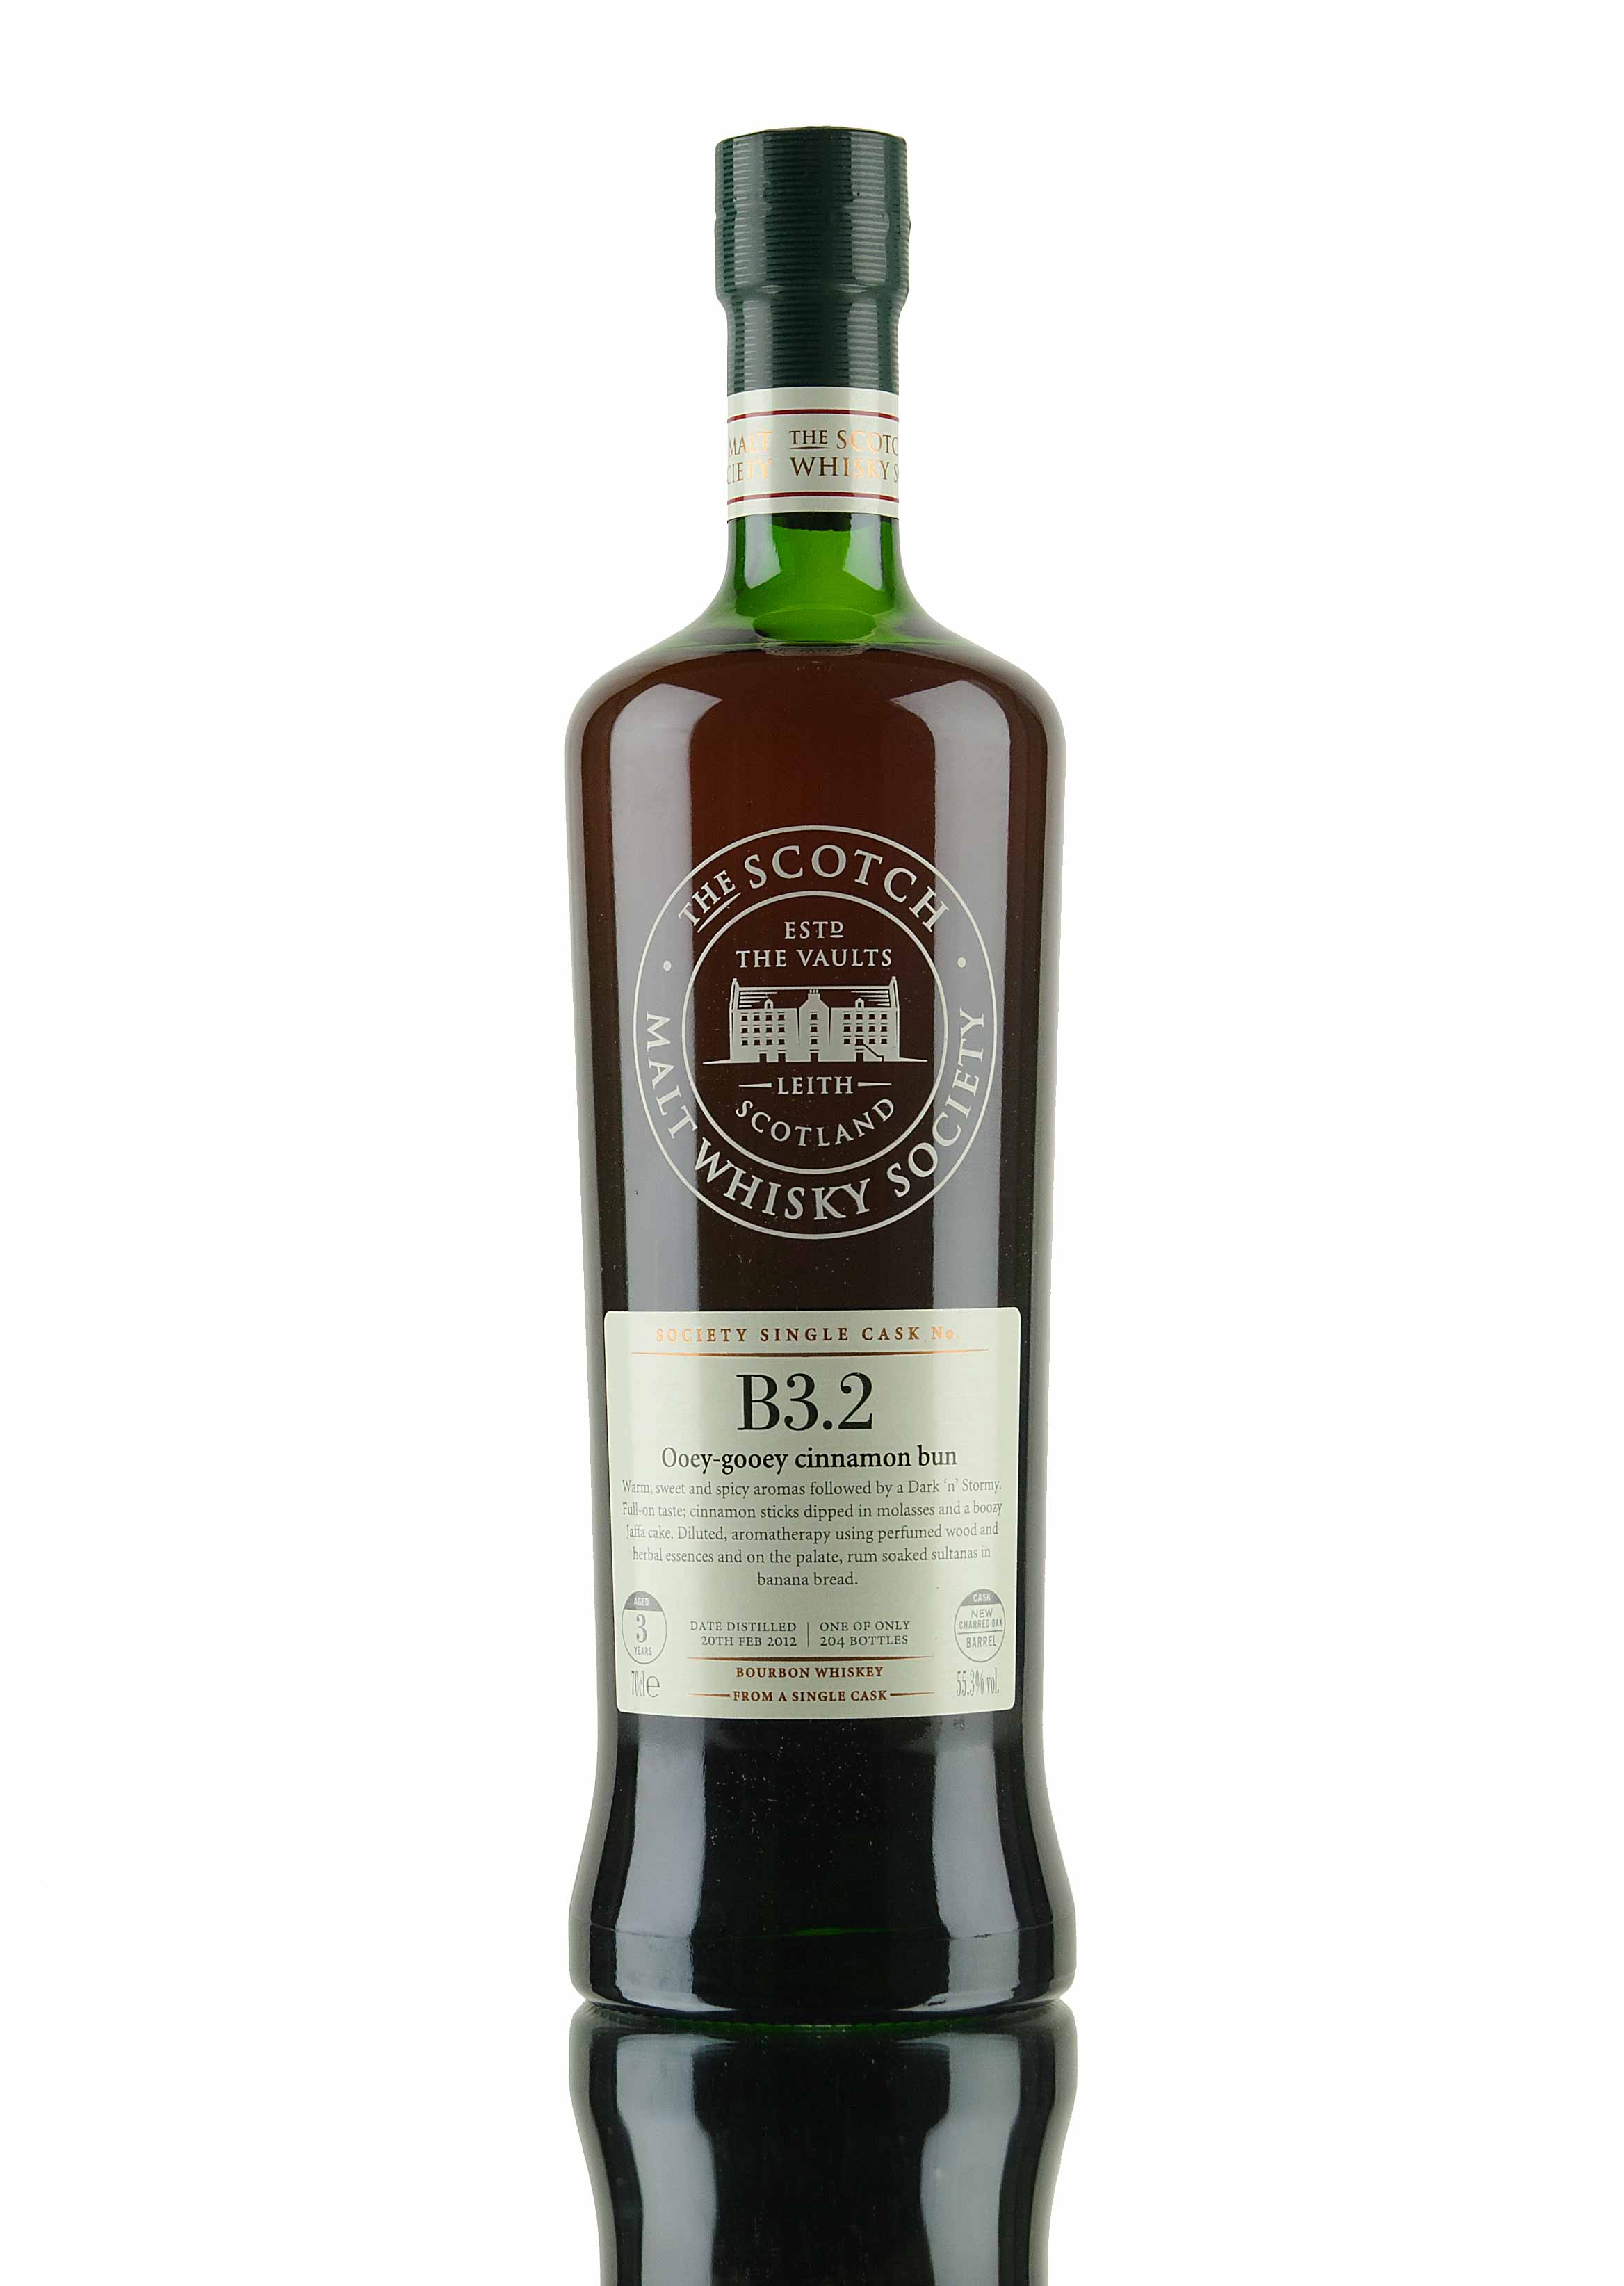 Rock Town 3 Year Old - 2012 / SMWS B3.2